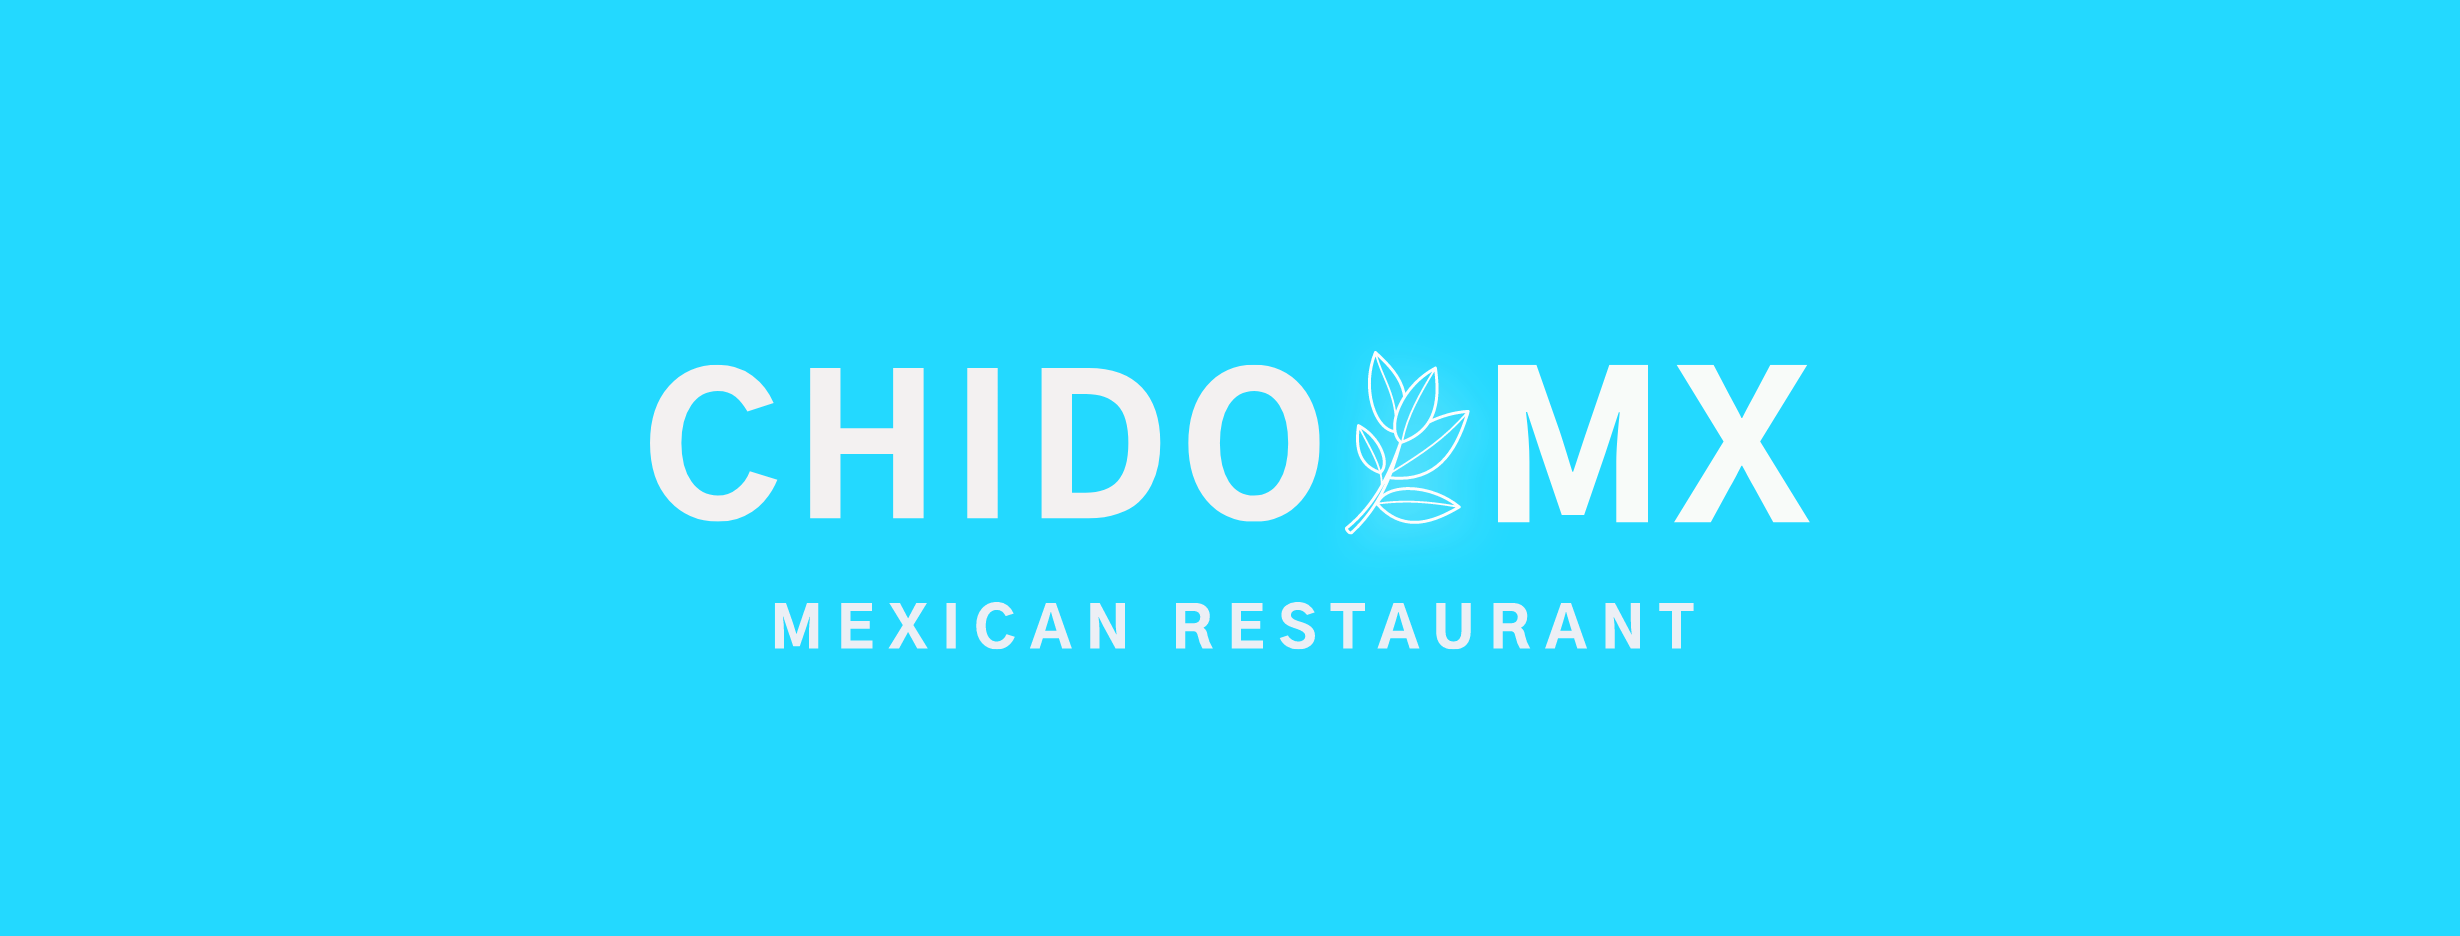 WELCOME TO OUR CHIDO MX KITCHEN    